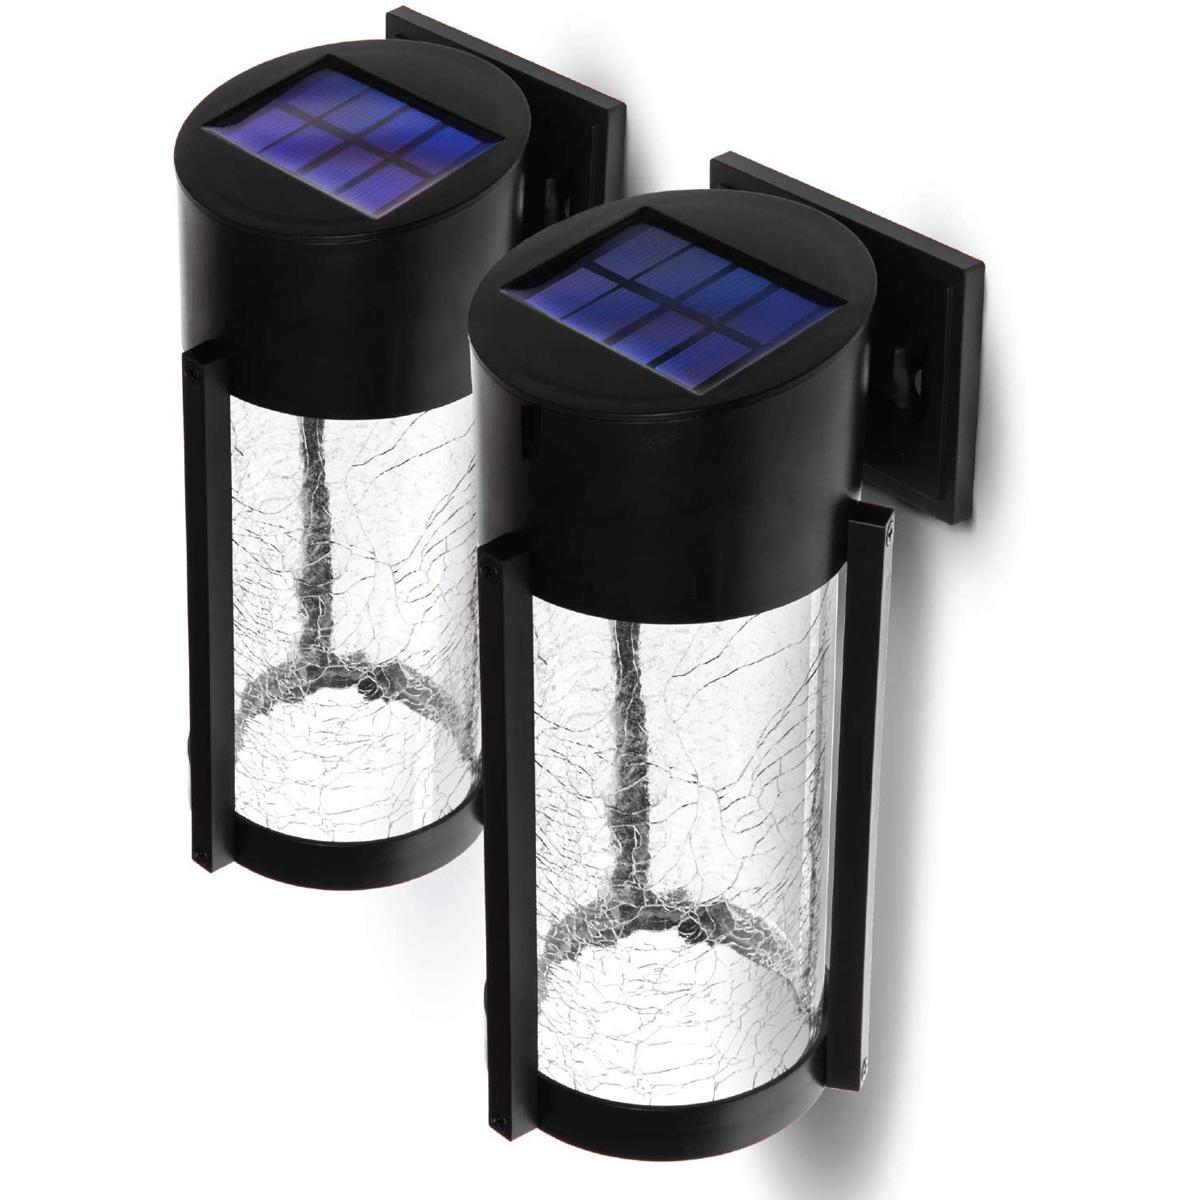 Home Zone 2-Pack Solar Decorative Glass Sconce Lights for $17.99 Shipped